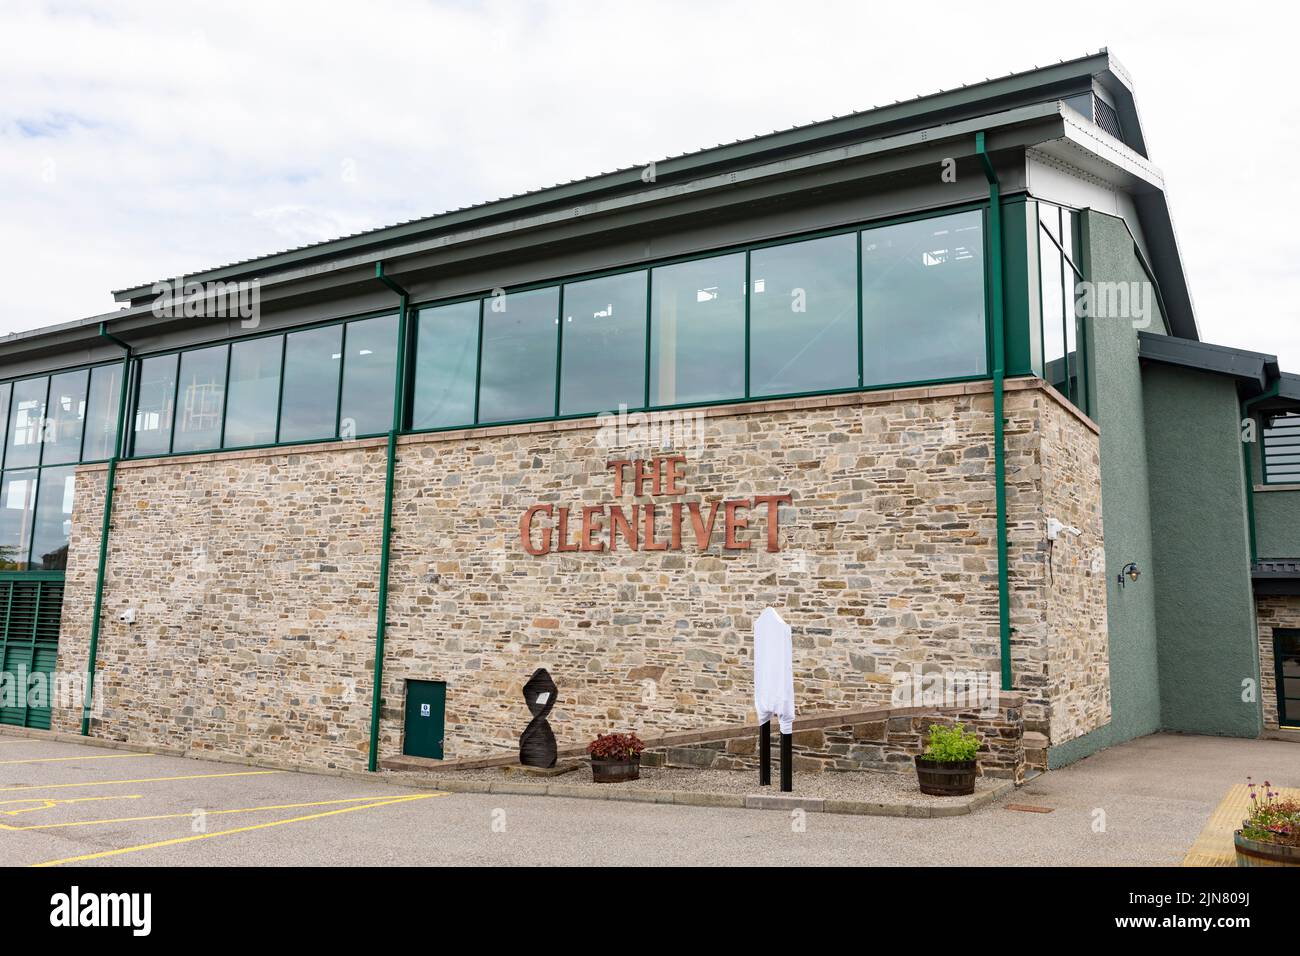 The Glenlivet scotch whisky distillery and visitor centre Stock Photo